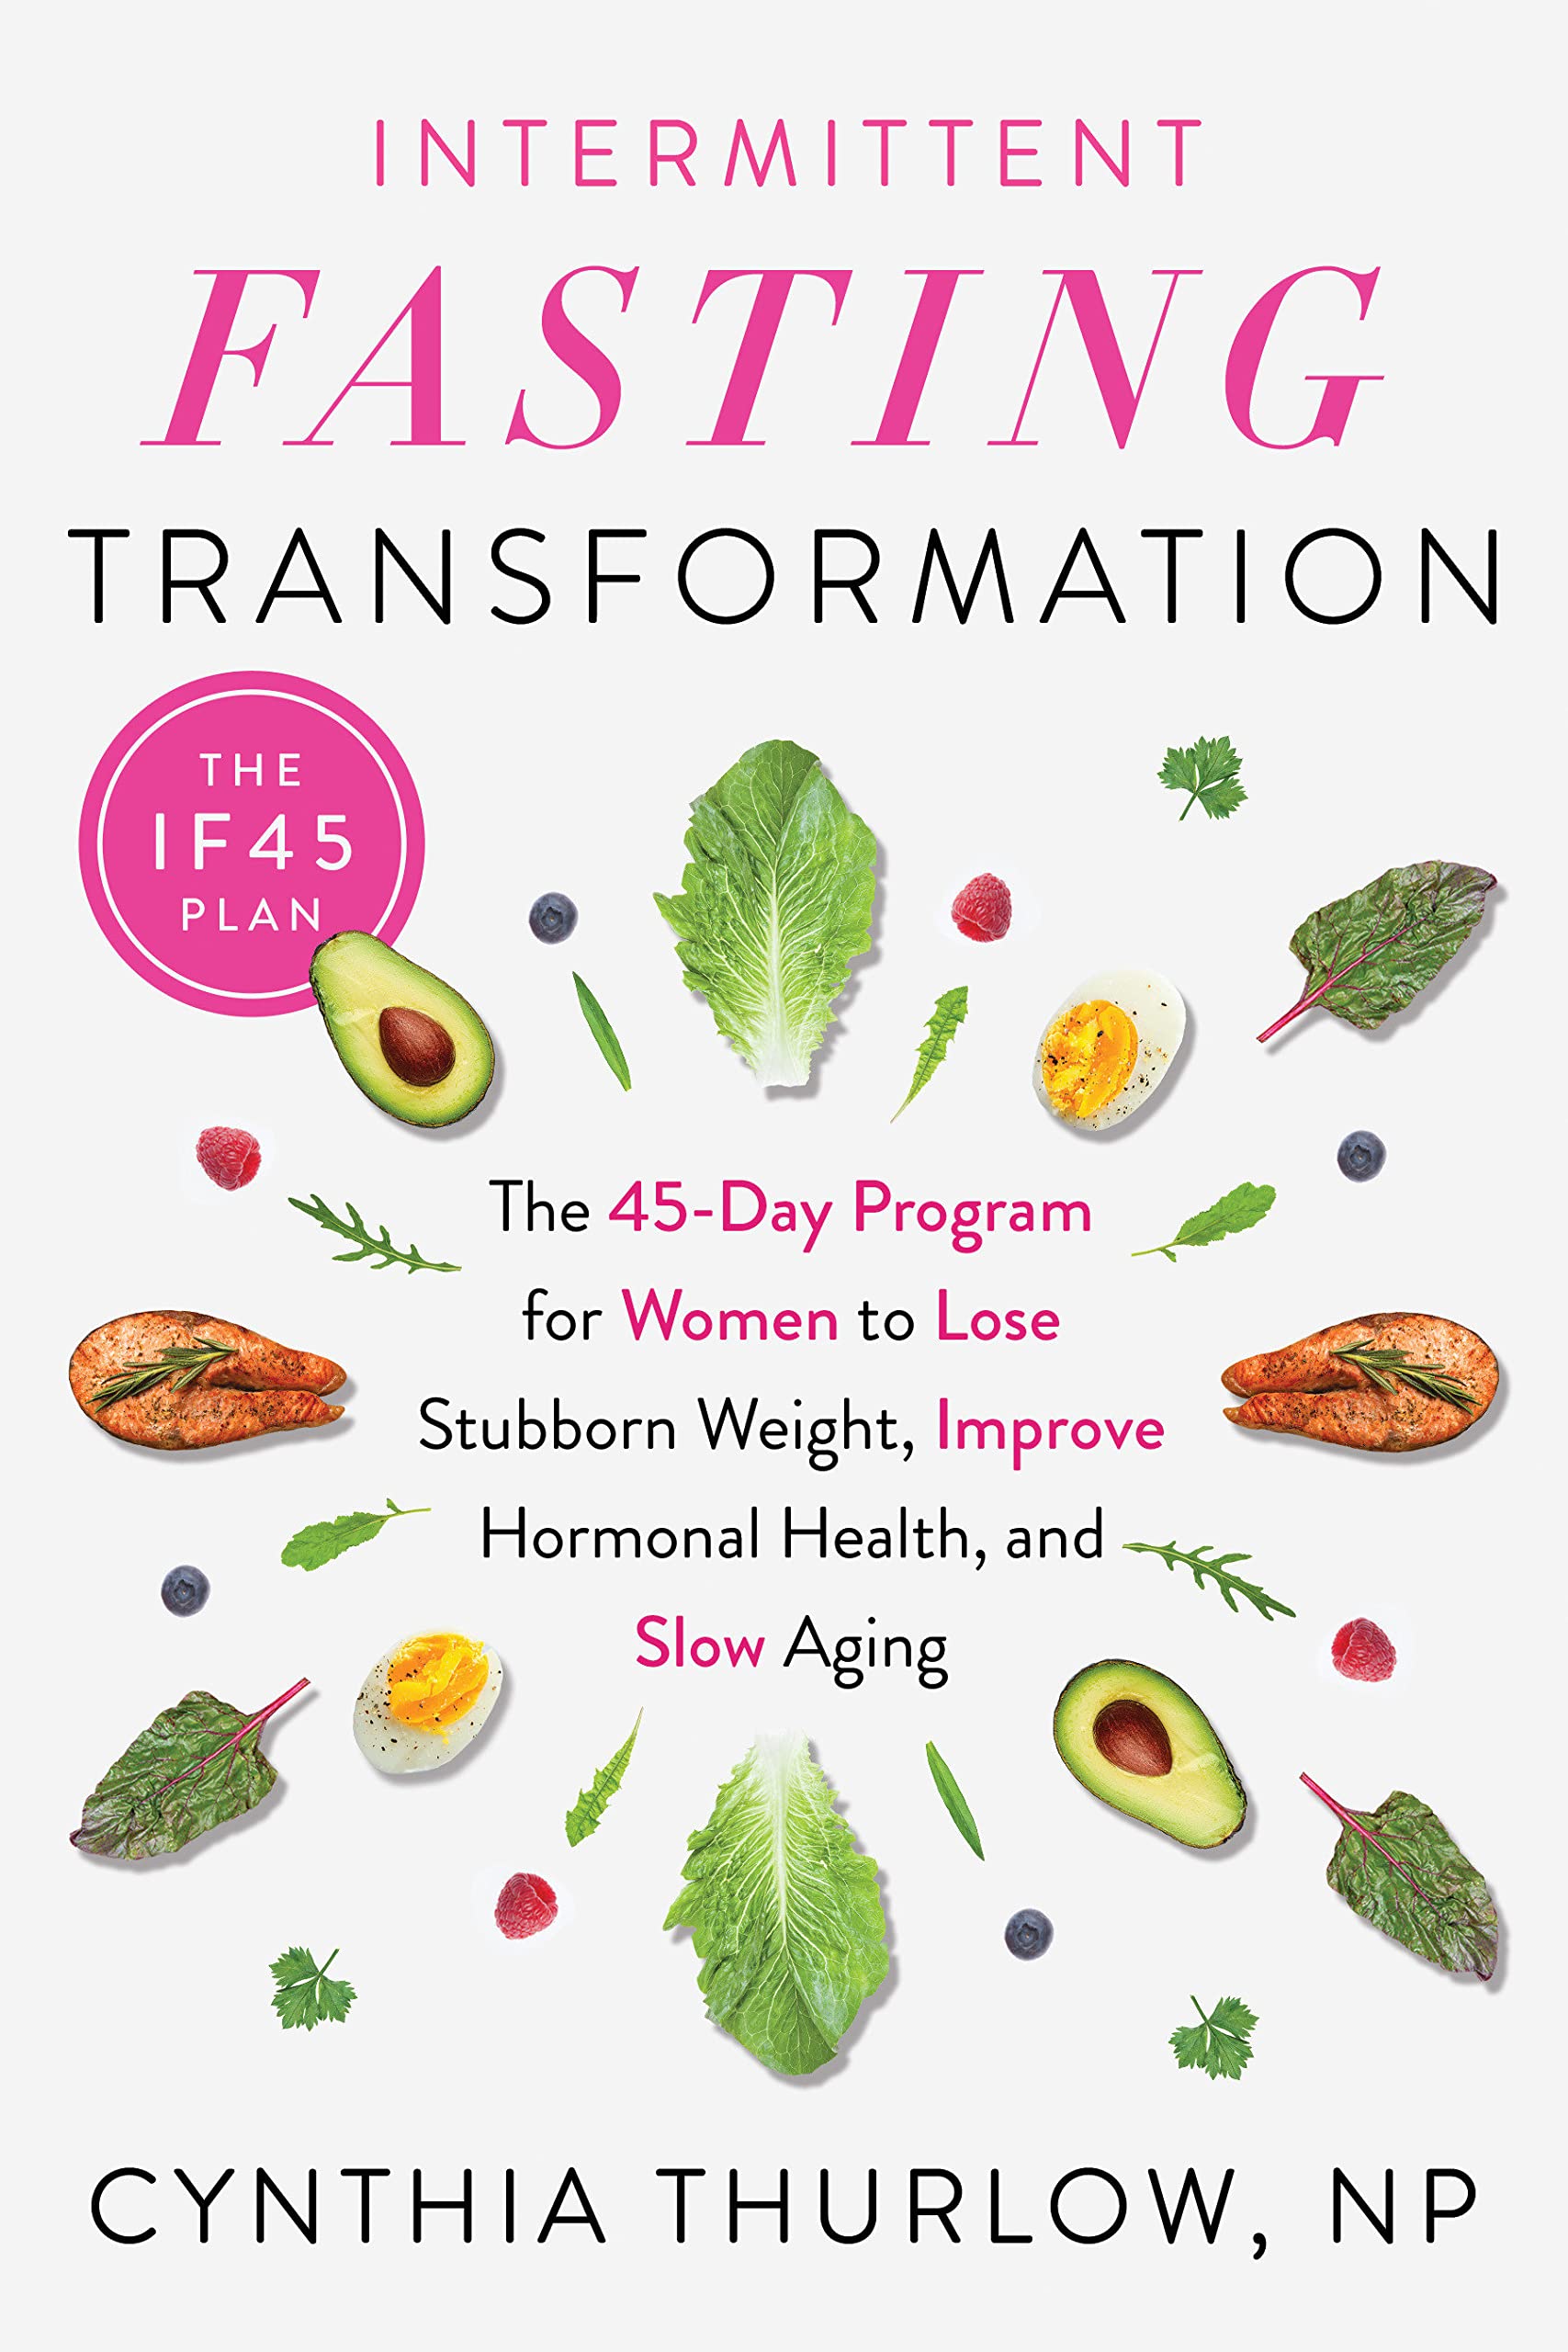 Intermittent Fasting Transformation: The 45-Day Program for Women to Lose Stubborn Weight - SureShot Books Publishing LLC